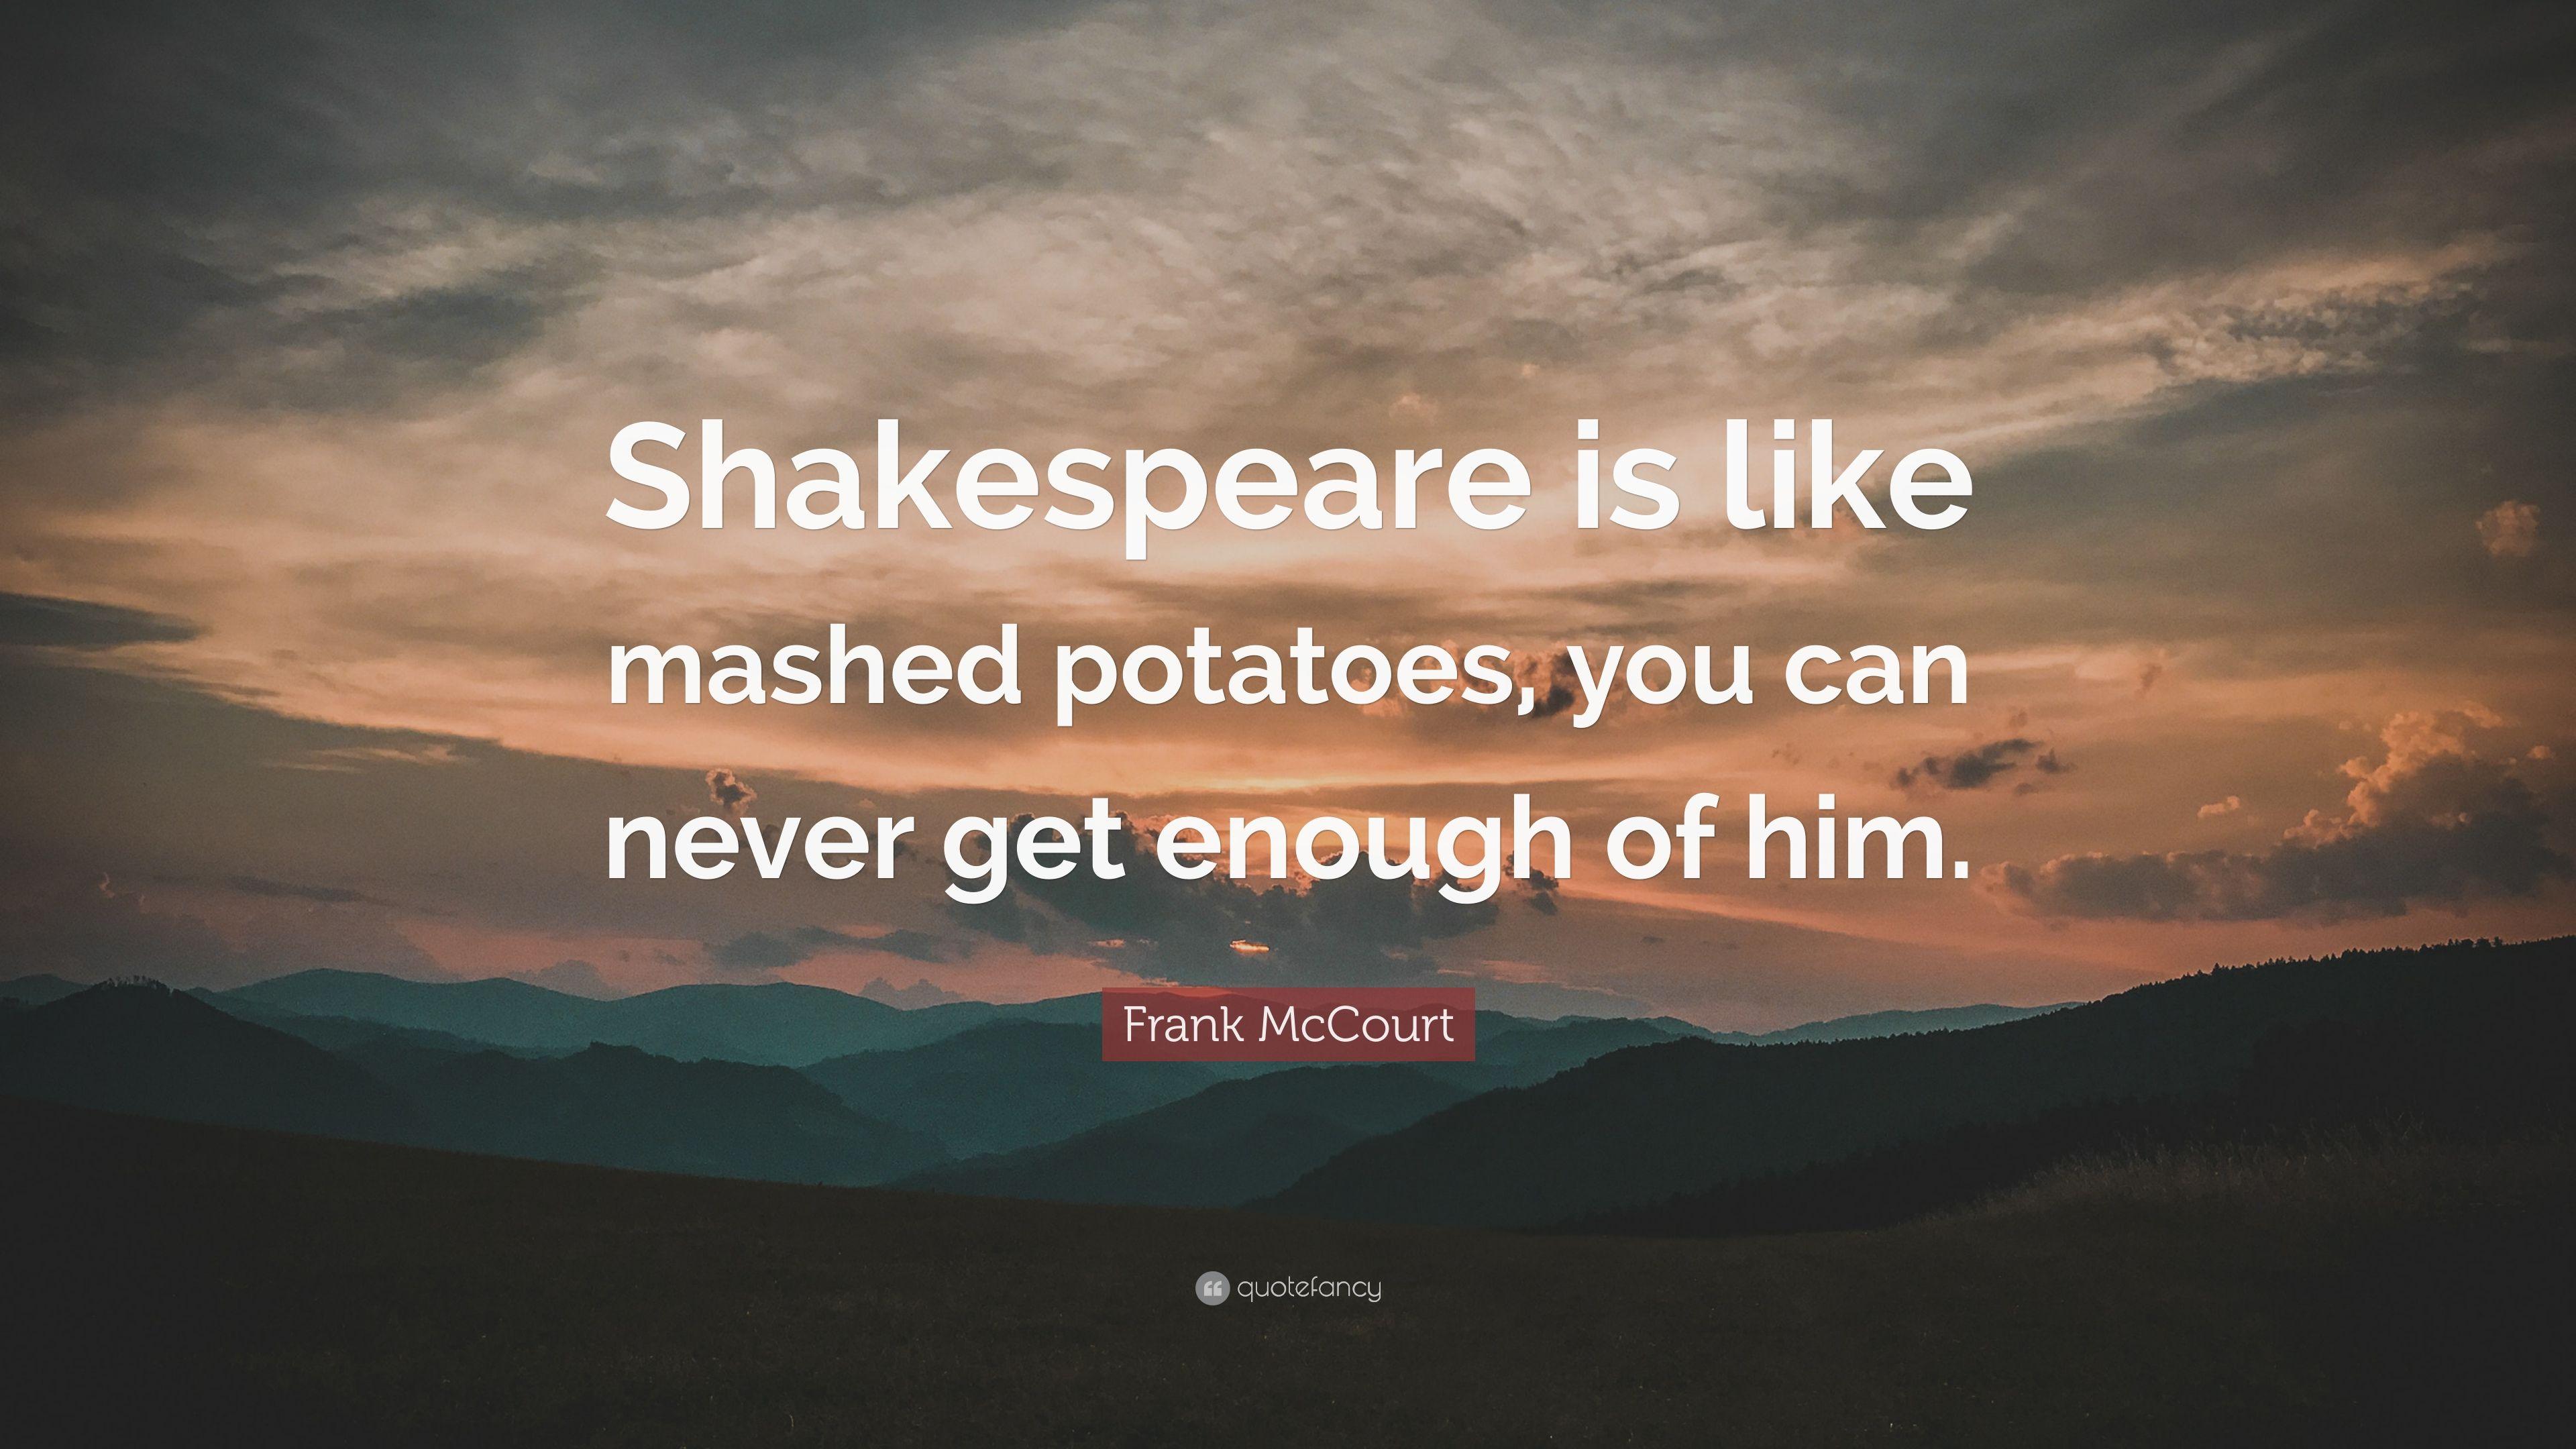 Frank McCourt Quote: “Shakespeare is like mashed potatoes, you can